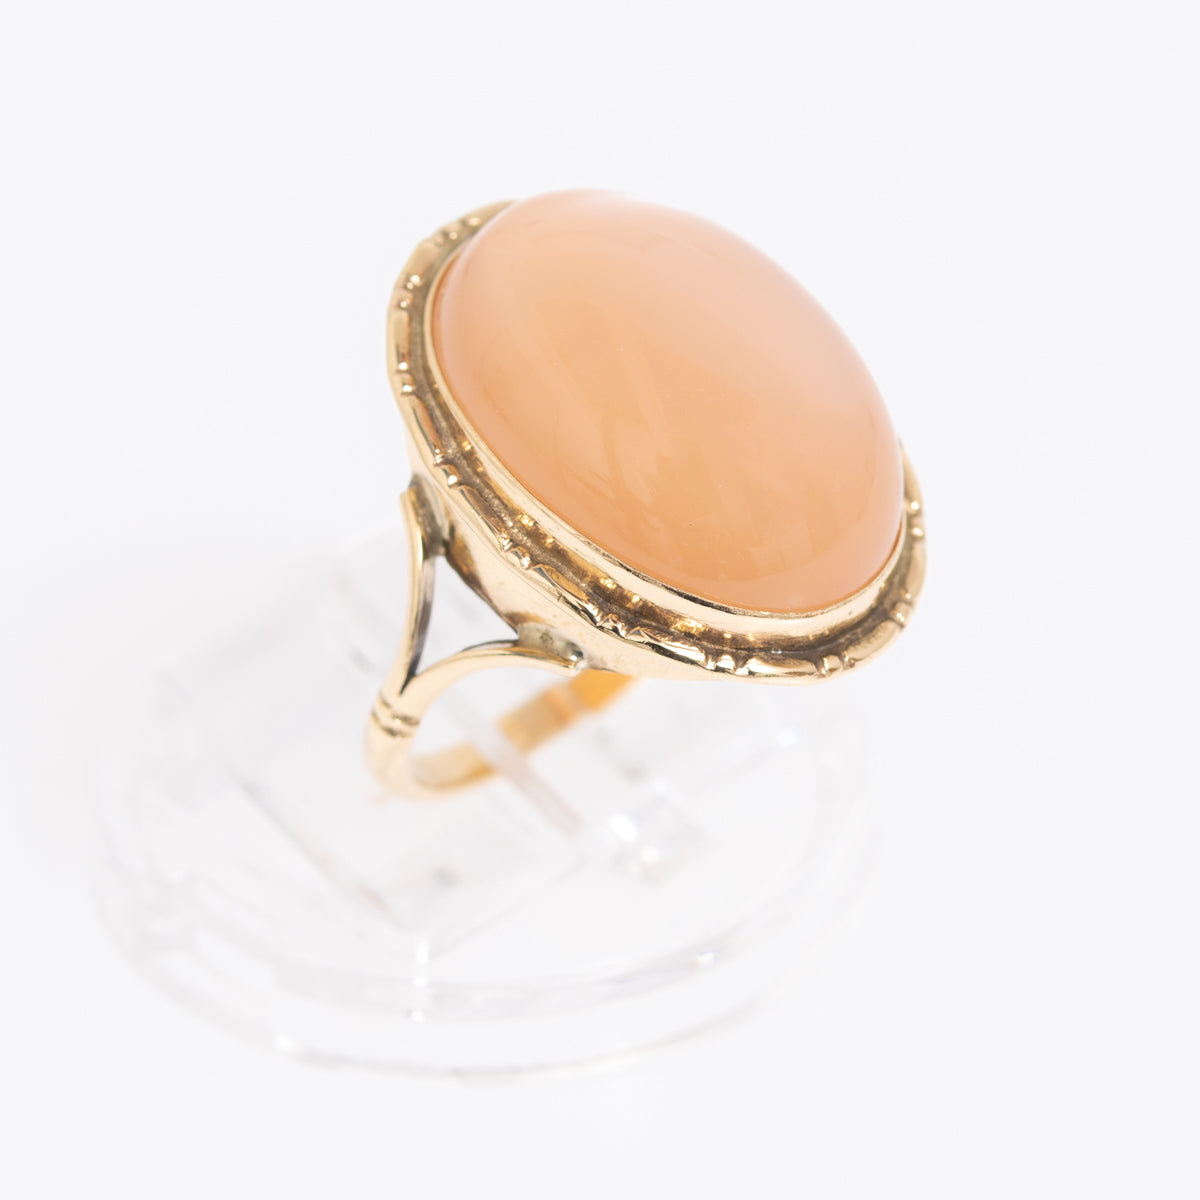 Antique/Vintage 9ct Gold Ring With Fabulous Natural Rose Moonstone Cabochon (A1145)